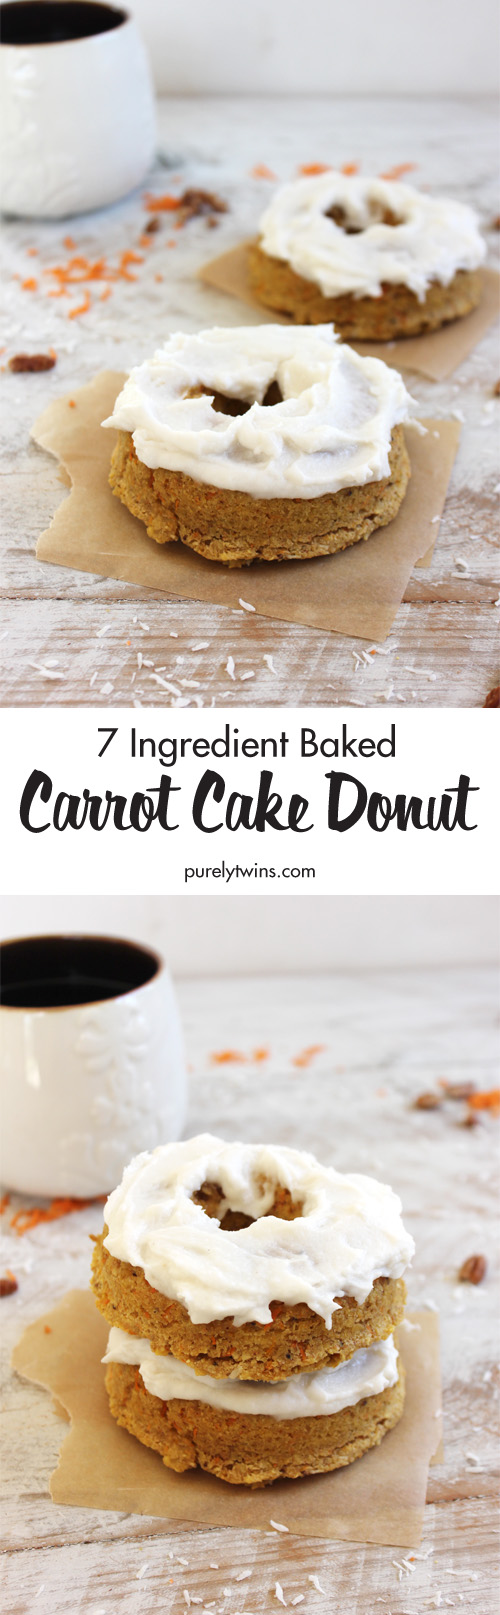  Baked Carrot Cake Donuts made from only 7 simple ingredients and with dairy-free coconut butter frosting. This easy baked donut recipe is perfect way to enjoy the classic carrot cake for breakfast with a warm cup of coffee. Carrot Cake Baked Donuts that are gluten-free, paleo, vegan and no sugar added making it a low sugar donut. 